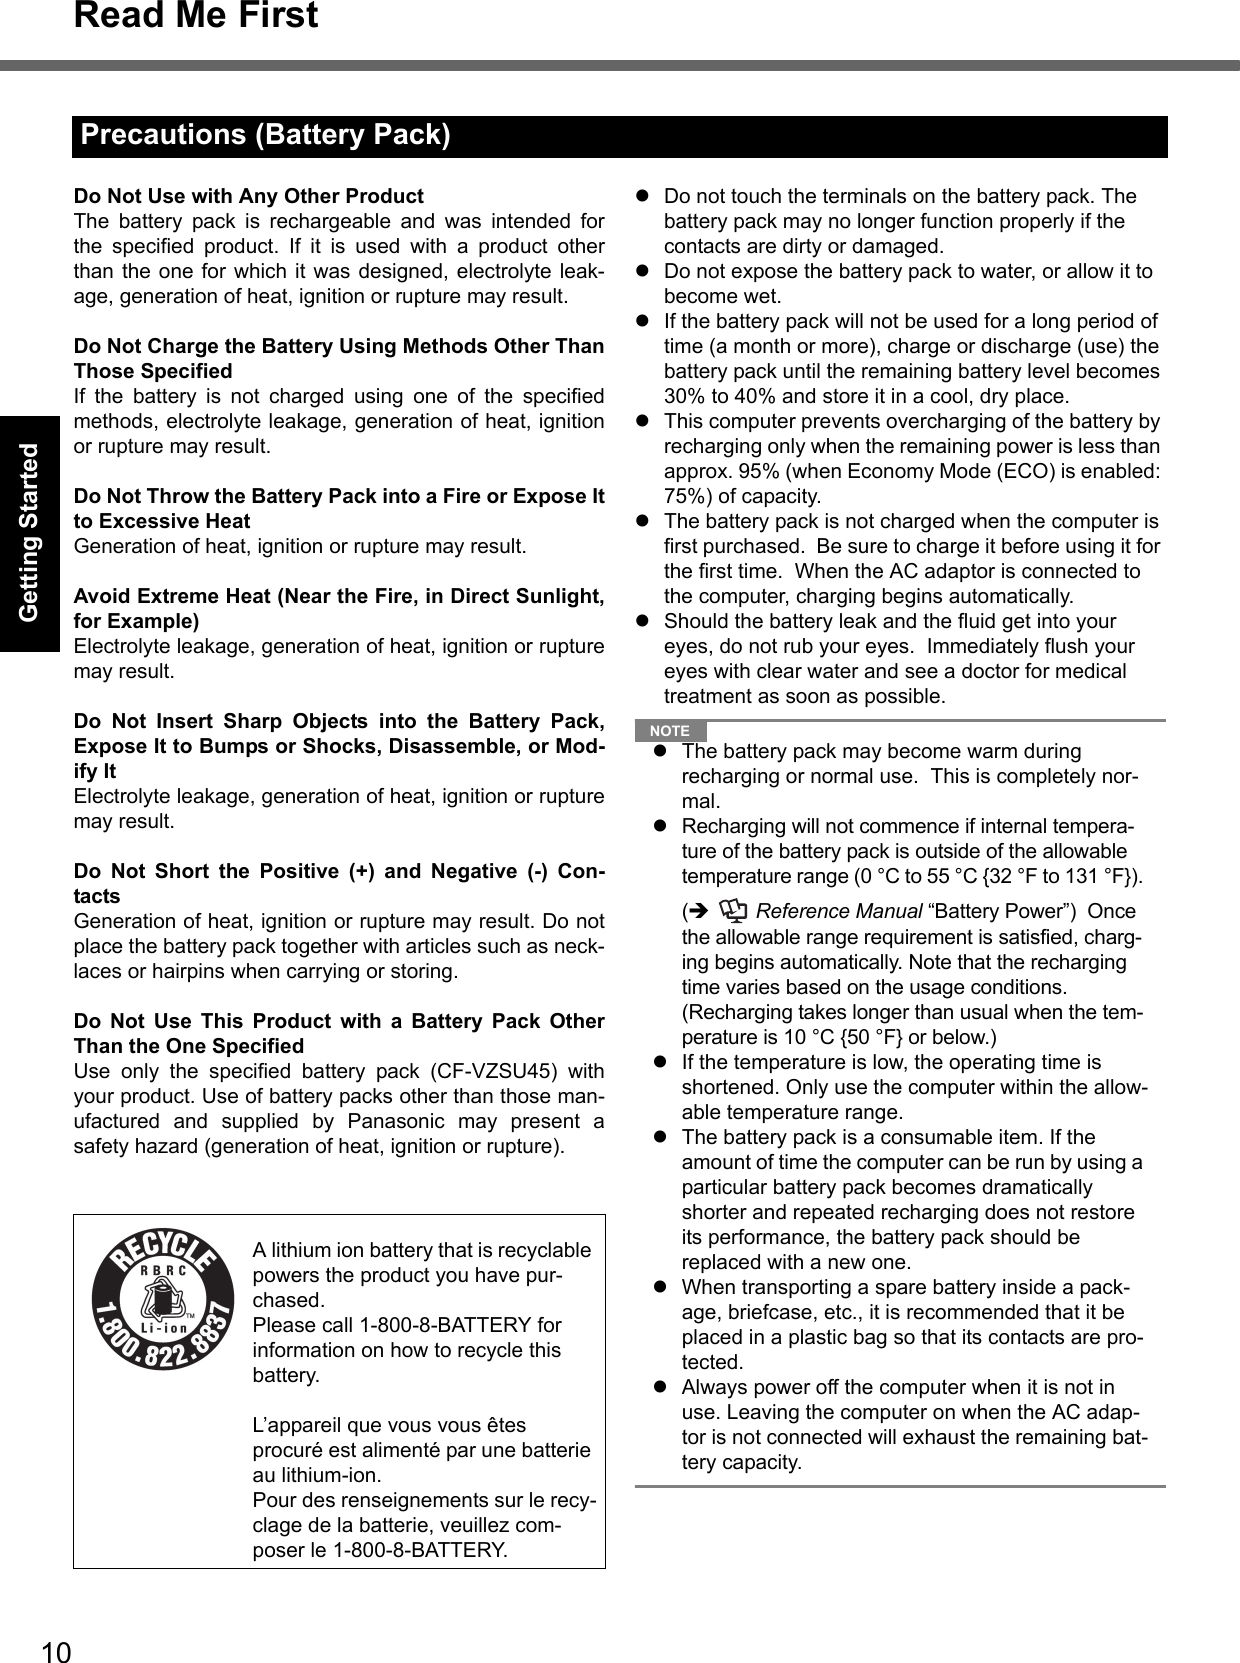 10Read Me FirstGetting StartedUseful InformationTroubleshootingAppendixDo Not Use with Any Other ProductThe battery pack is rechargeable and was intended forthe specified product. If it is used with a product otherthan the one for which it was designed, electrolyte leak-age, generation of heat, ignition or rupture may result.Do Not Charge the Battery Using Methods Other ThanThose SpecifiedIf the battery is not charged using one of the specifiedmethods, electrolyte leakage, generation of heat, ignitionor rupture may result.Do Not Throw the Battery Pack into a Fire or Expose Itto Excessive HeatGeneration of heat, ignition or rupture may result.Avoid Extreme Heat (Near the Fire, in Direct Sunlight,for Example)Electrolyte leakage, generation of heat, ignition or rupturemay result.Do Not Insert Sharp Objects into the Battery Pack,Expose It to Bumps or Shocks, Disassemble, or Mod-ify ItElectrolyte leakage, generation of heat, ignition or rupturemay result.Do Not Short the Positive (+) and Negative (-) Con-tactsGeneration of heat, ignition or rupture may result. Do notplace the battery pack together with articles such as neck-laces or hairpins when carrying or storing.Do Not Use This Product with a Battery Pack OtherThan the One SpecifiedUse only the specified battery pack (CF-VZSU45) withyour product. Use of battery packs other than those man-ufactured and supplied by Panasonic may present asafety hazard (generation of heat, ignition or rupture).zDo not touch the terminals on the battery pack. The battery pack may no longer function properly if the contacts are dirty or damaged.zDo not expose the battery pack to water, or allow it to become wet.zIf the battery pack will not be used for a long period of time (a month or more), charge or discharge (use) the battery pack until the remaining battery level becomes 30% to 40% and store it in a cool, dry place.zThis computer prevents overcharging of the battery by recharging only when the remaining power is less than approx. 95% (when Economy Mode (ECO) is enabled: 75%) of capacity.zThe battery pack is not charged when the computer is first purchased.  Be sure to charge it before using it for the first time.  When the AC adaptor is connected to the computer, charging begins automatically.zShould the battery leak and the fluid get into your eyes, do not rub your eyes.  Immediately flush your eyes with clear water and see a doctor for medical treatment as soon as possible.NOTEzThe battery pack may become warm during recharging or normal use.  This is completely nor-mal.zRecharging will not commence if internal tempera-ture of the battery pack is outside of the allowable temperature range (0 °C to 55 °C {32 °F to 131 °F}). (Î  Reference Manual “Battery Power”)  Once the allowable range requirement is satisfied, charg-ing begins automatically. Note that the recharging time varies based on the usage conditions. (Recharging takes longer than usual when the tem-perature is 10 °C {50 °F} or below.)zIf the temperature is low, the operating time is shortened. Only use the computer within the allow-able temperature range.zThe battery pack is a consumable item. If the amount of time the computer can be run by using a particular battery pack becomes dramatically shorter and repeated recharging does not restore its performance, the battery pack should be replaced with a new one.  zWhen transporting a spare battery inside a pack-age, briefcase, etc., it is recommended that it be placed in a plastic bag so that its contacts are pro-tected.zAlways power off the computer when it is not in use. Leaving the computer on when the AC adap-tor is not connected will exhaust the remaining bat-tery capacity.Precautions (Battery Pack)A lithium ion battery that is recyclable powers the product you have pur-chased.Please call 1-800-8-BATTERY for information on how to recycle this battery.L’appareil que vous vous êtes procuré est alimenté par une batterie au lithium-ion.Pour des renseignements sur le recy-clage de la batterie, veuillez com-poser le 1-800-8-BATTERY.